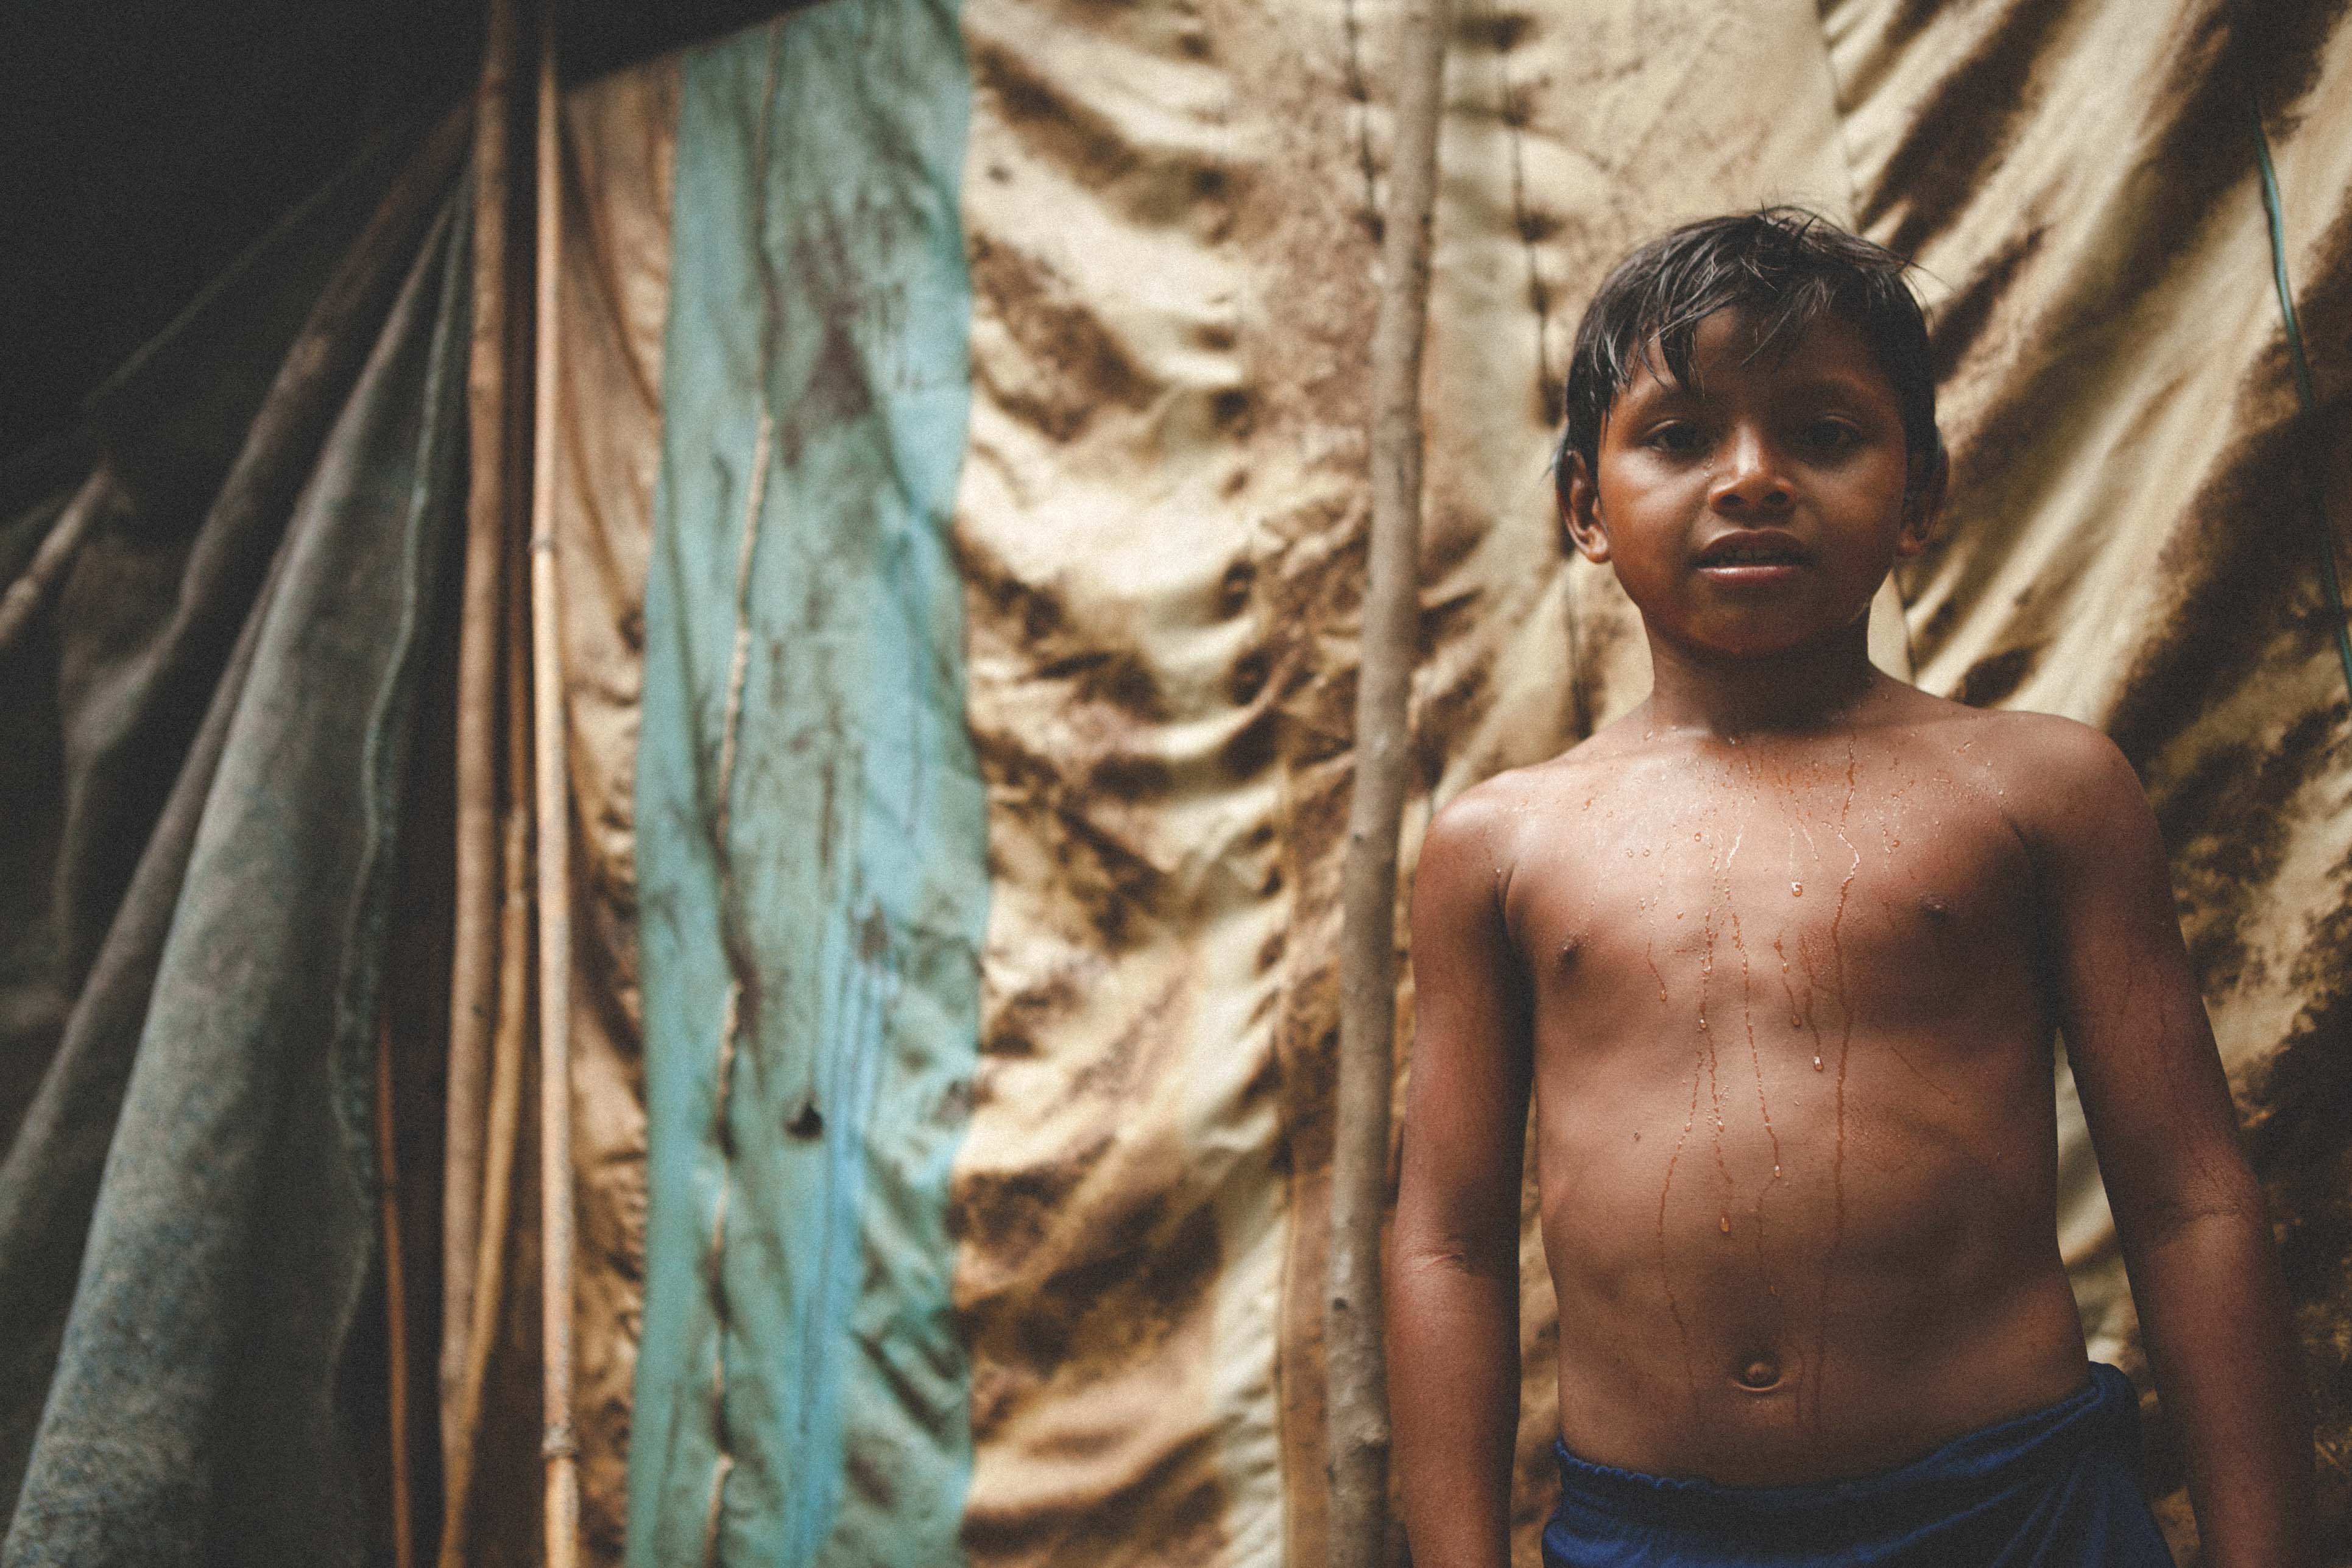 Little boy from a Indigenous tribe, in Paraná State, that are being forced to leave their homeland.